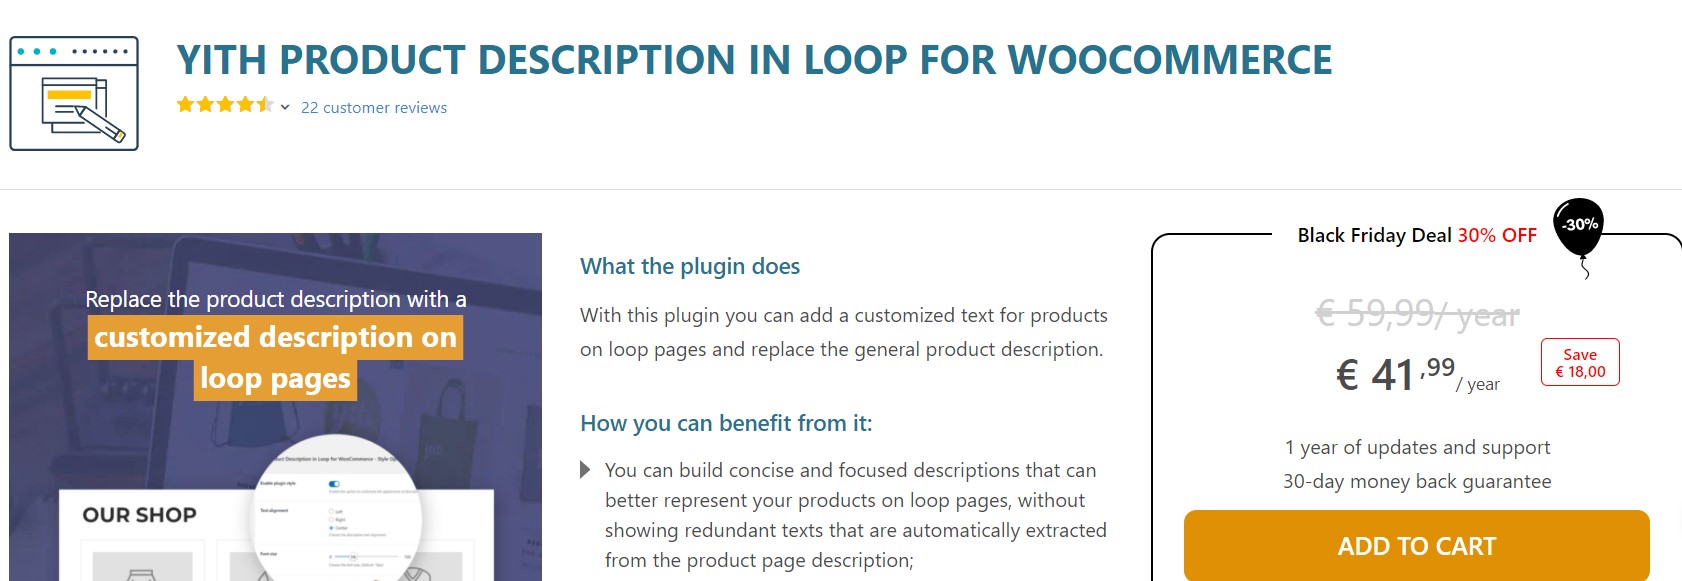 YITH Product Description in loop for WooCommerce